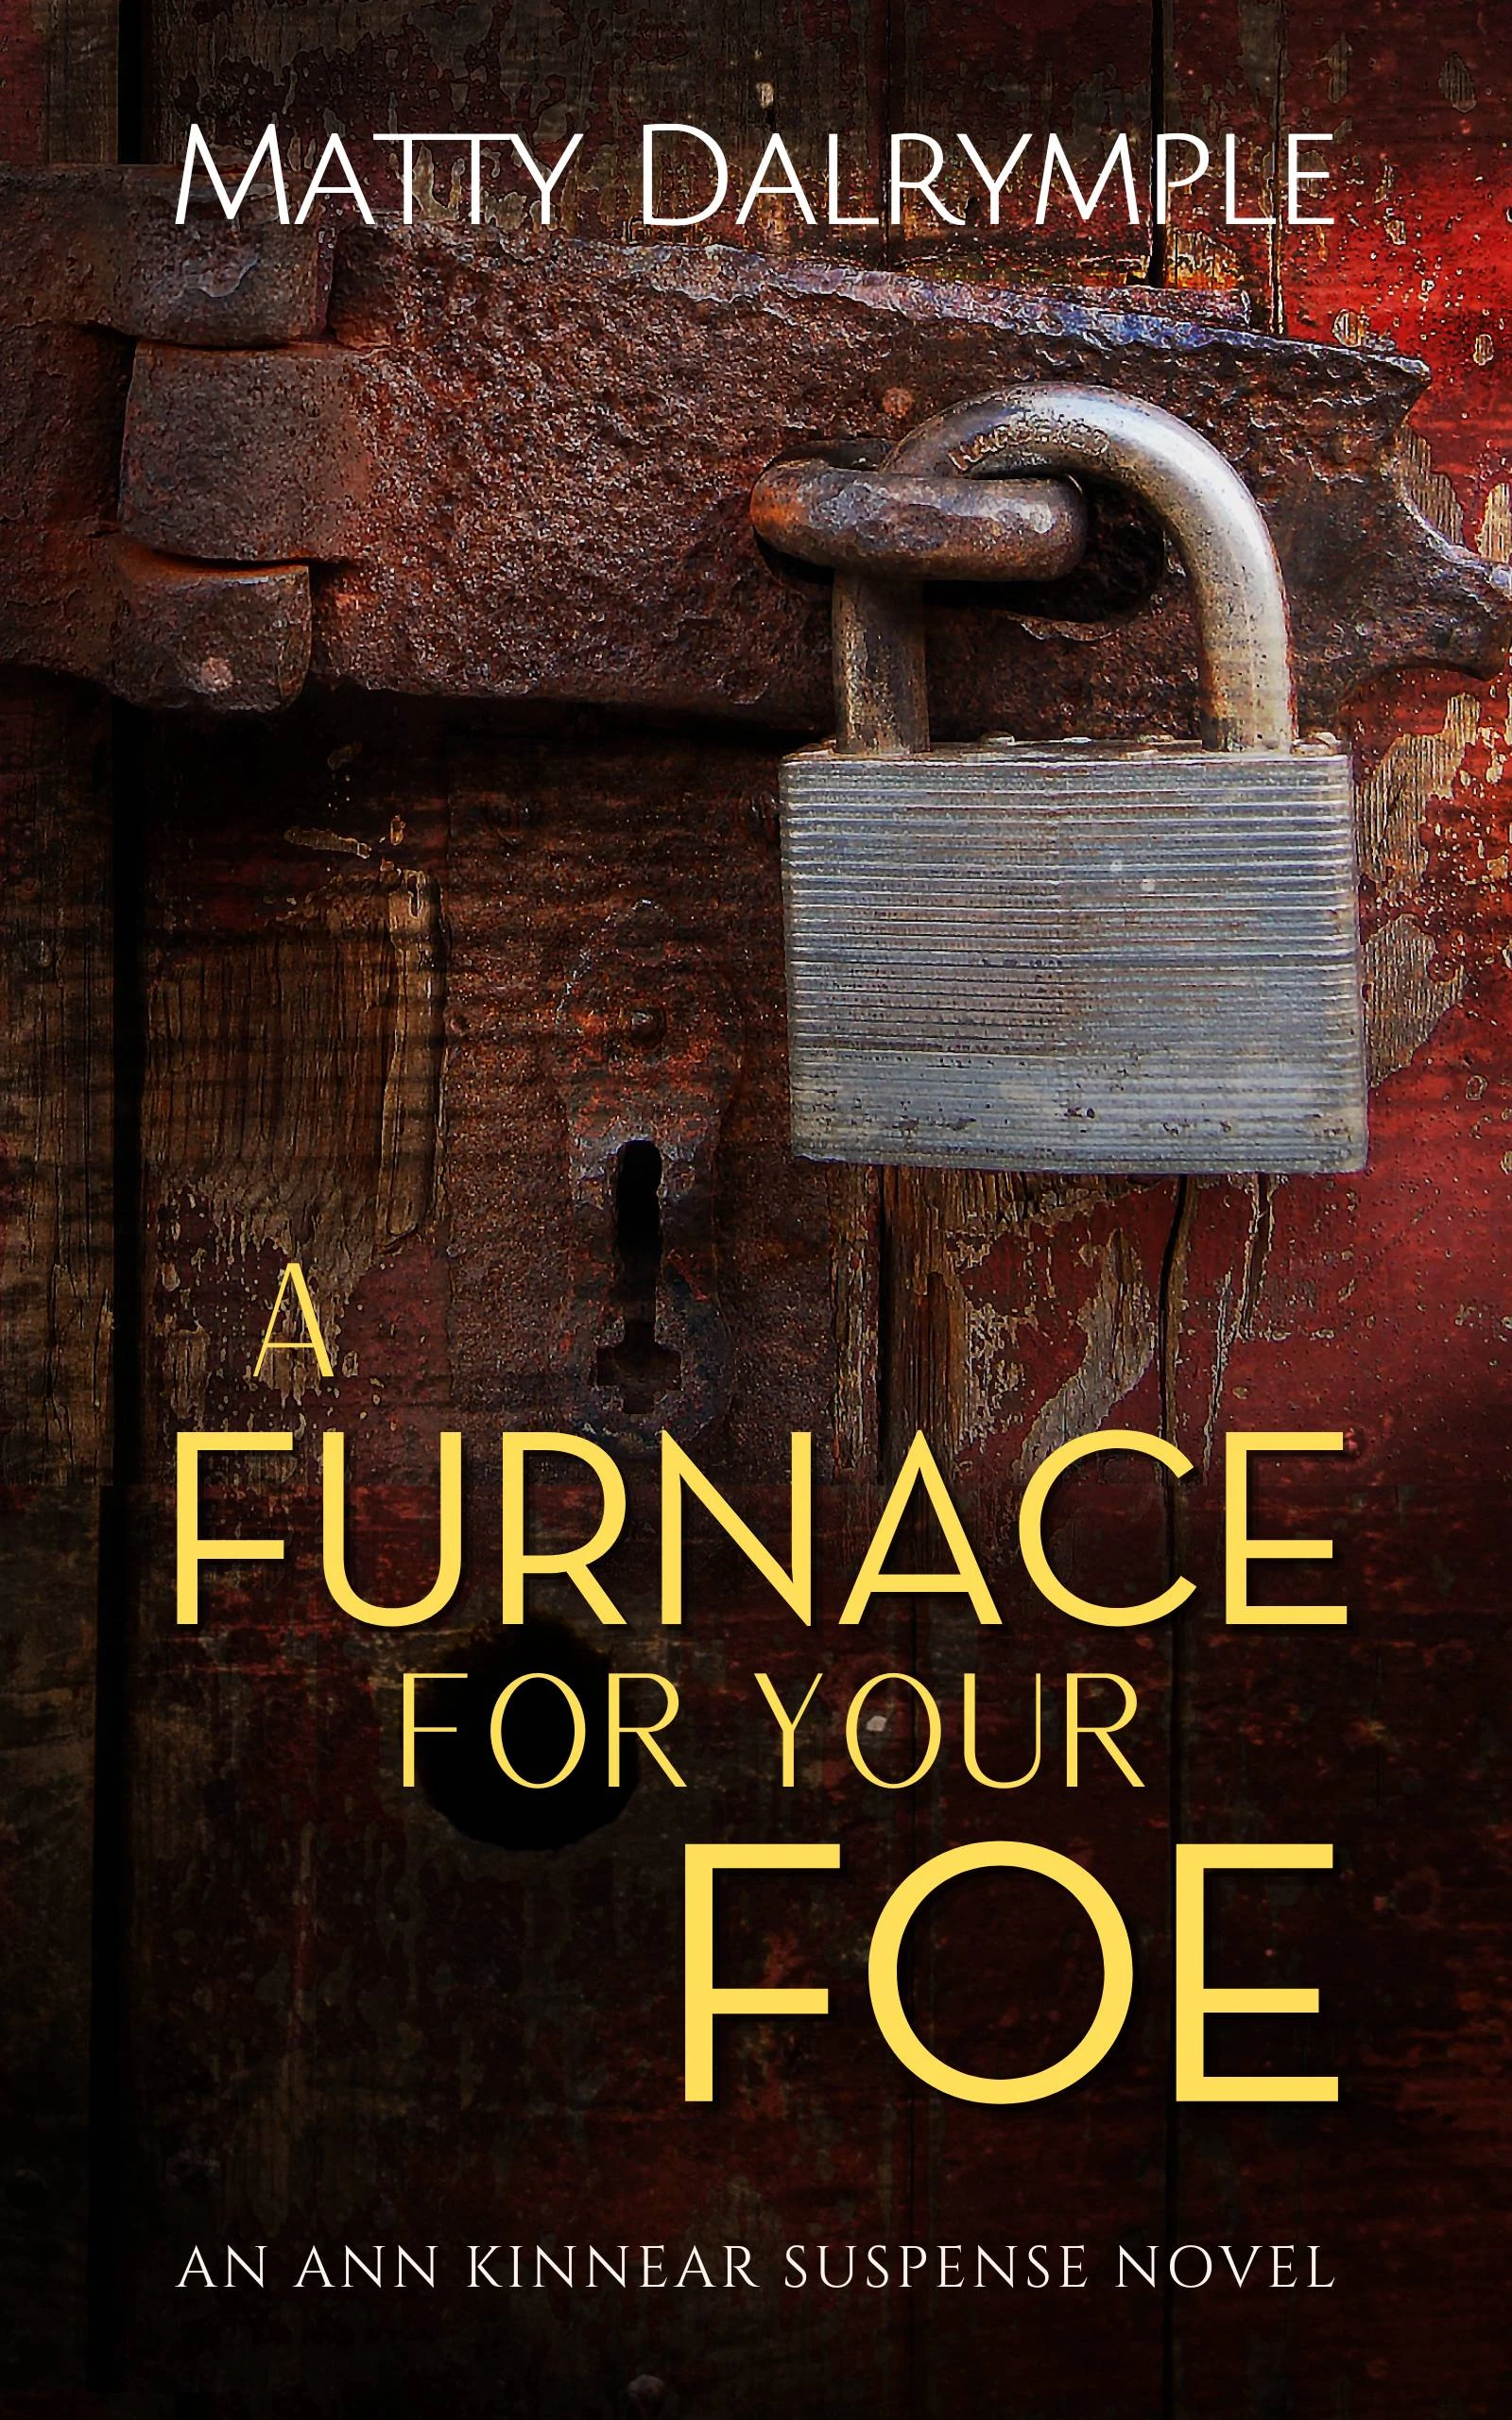 A Furnace for Your Foe